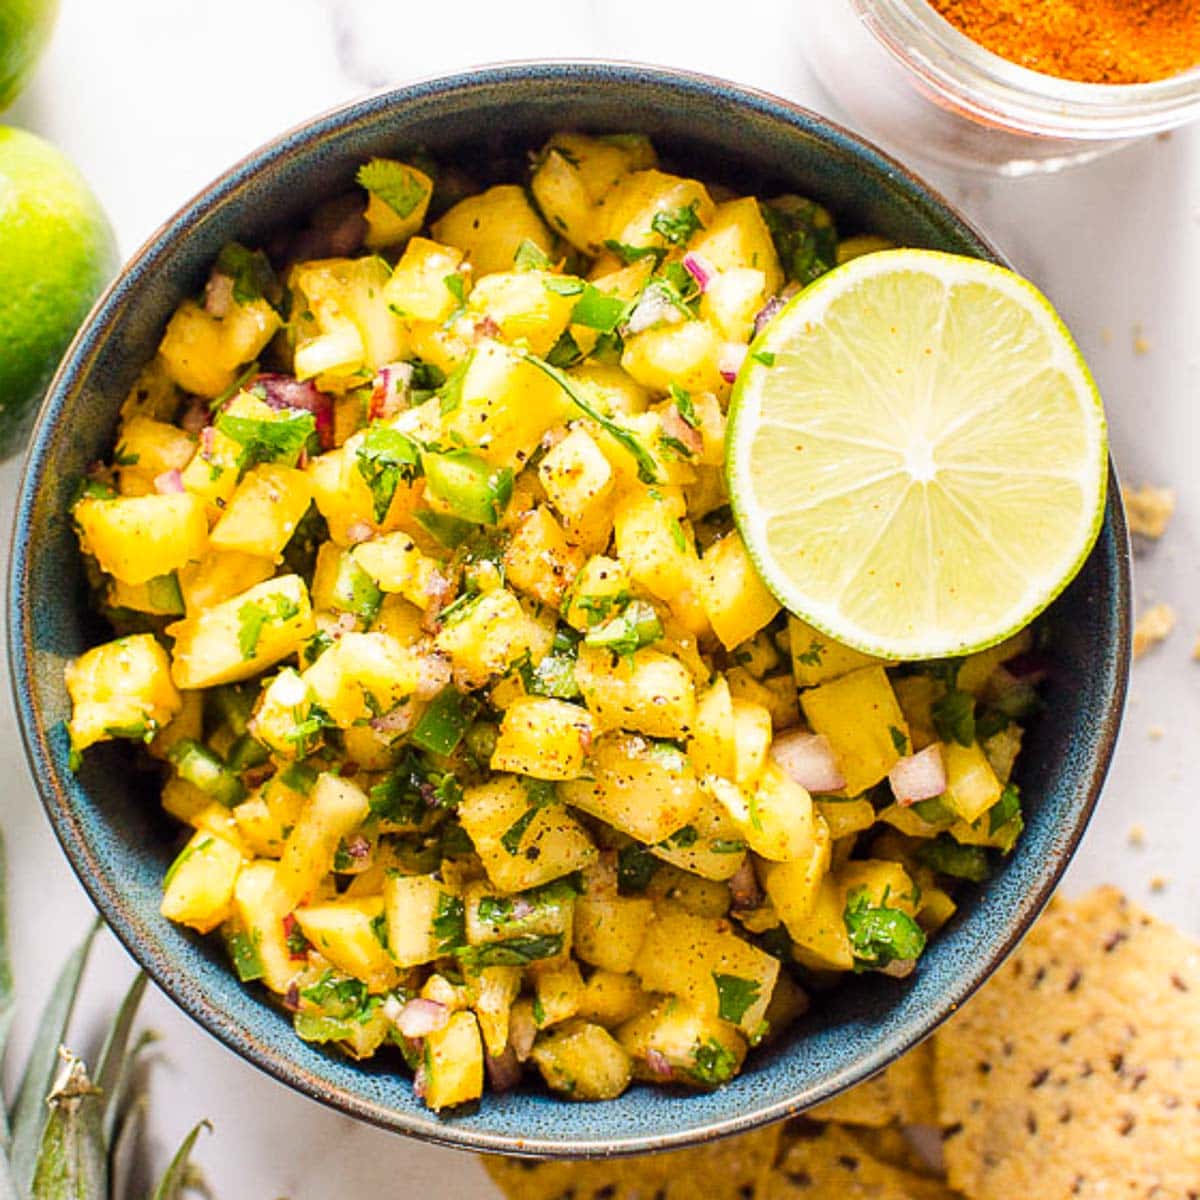 Pineapple jalapeno salsa ina. bowl with lime garnish and chips.